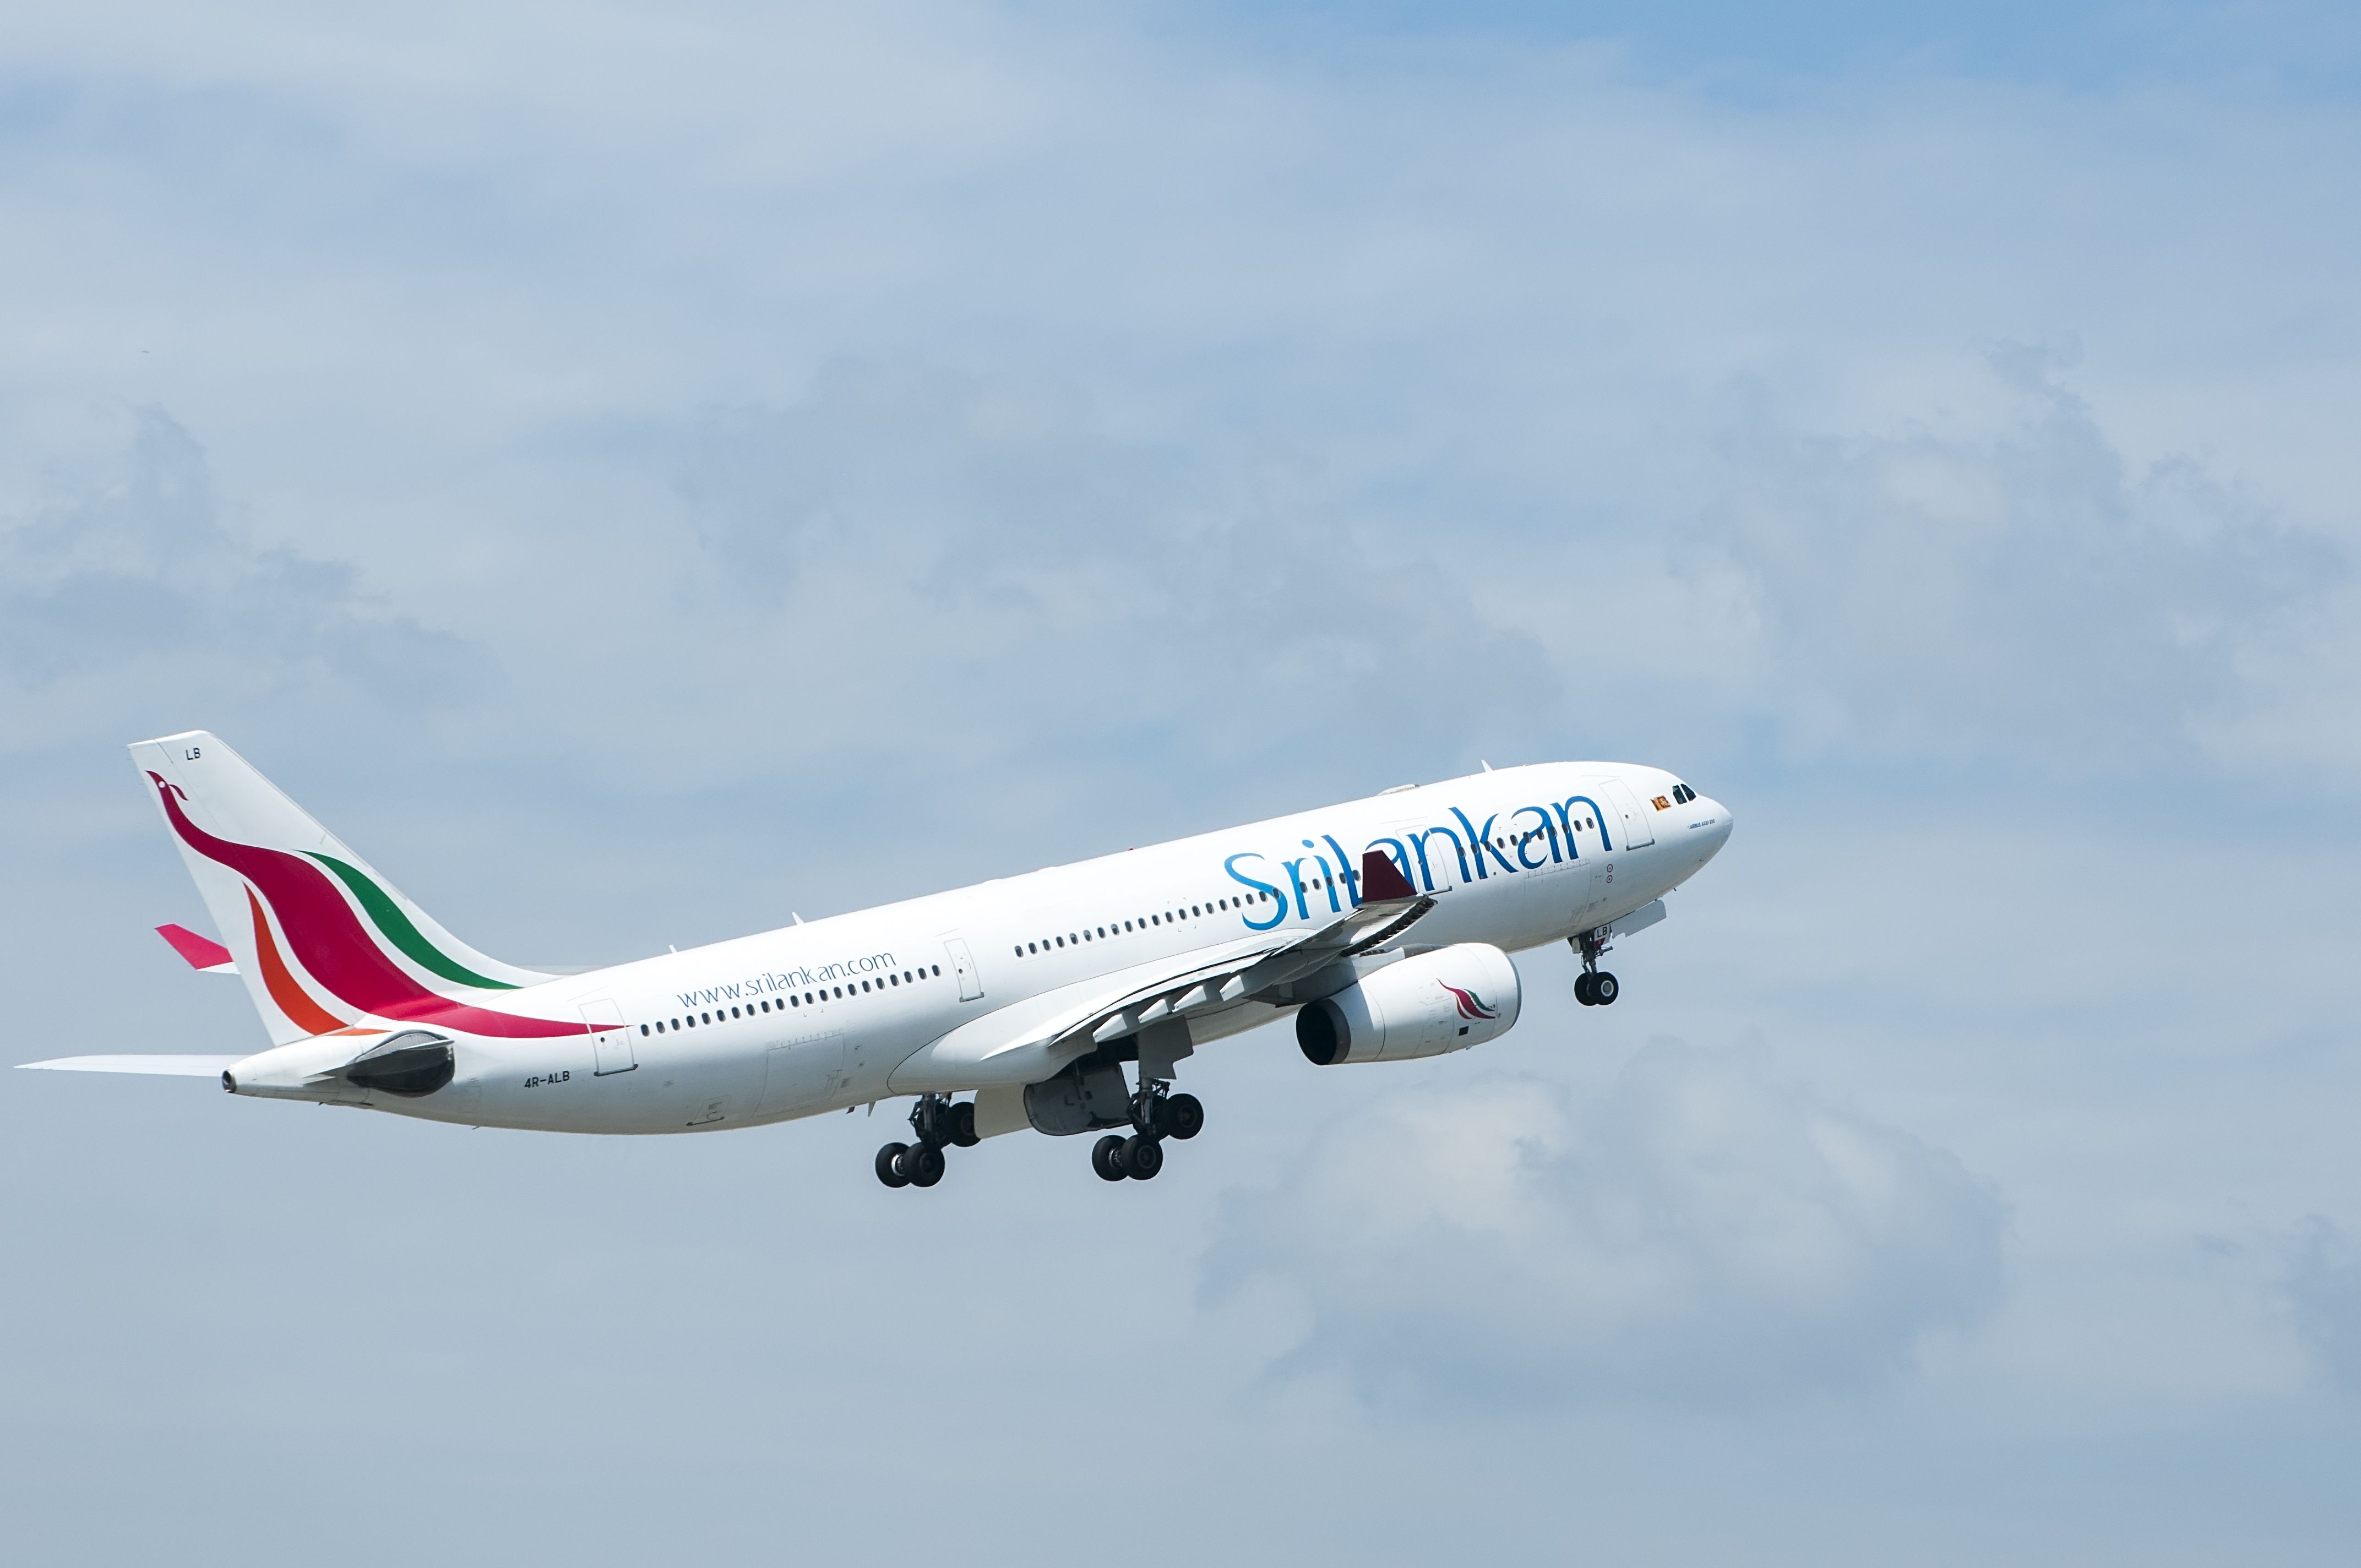 SriLankan Airlines Airbus A330 taking off from Kuala Lumpur International Airport